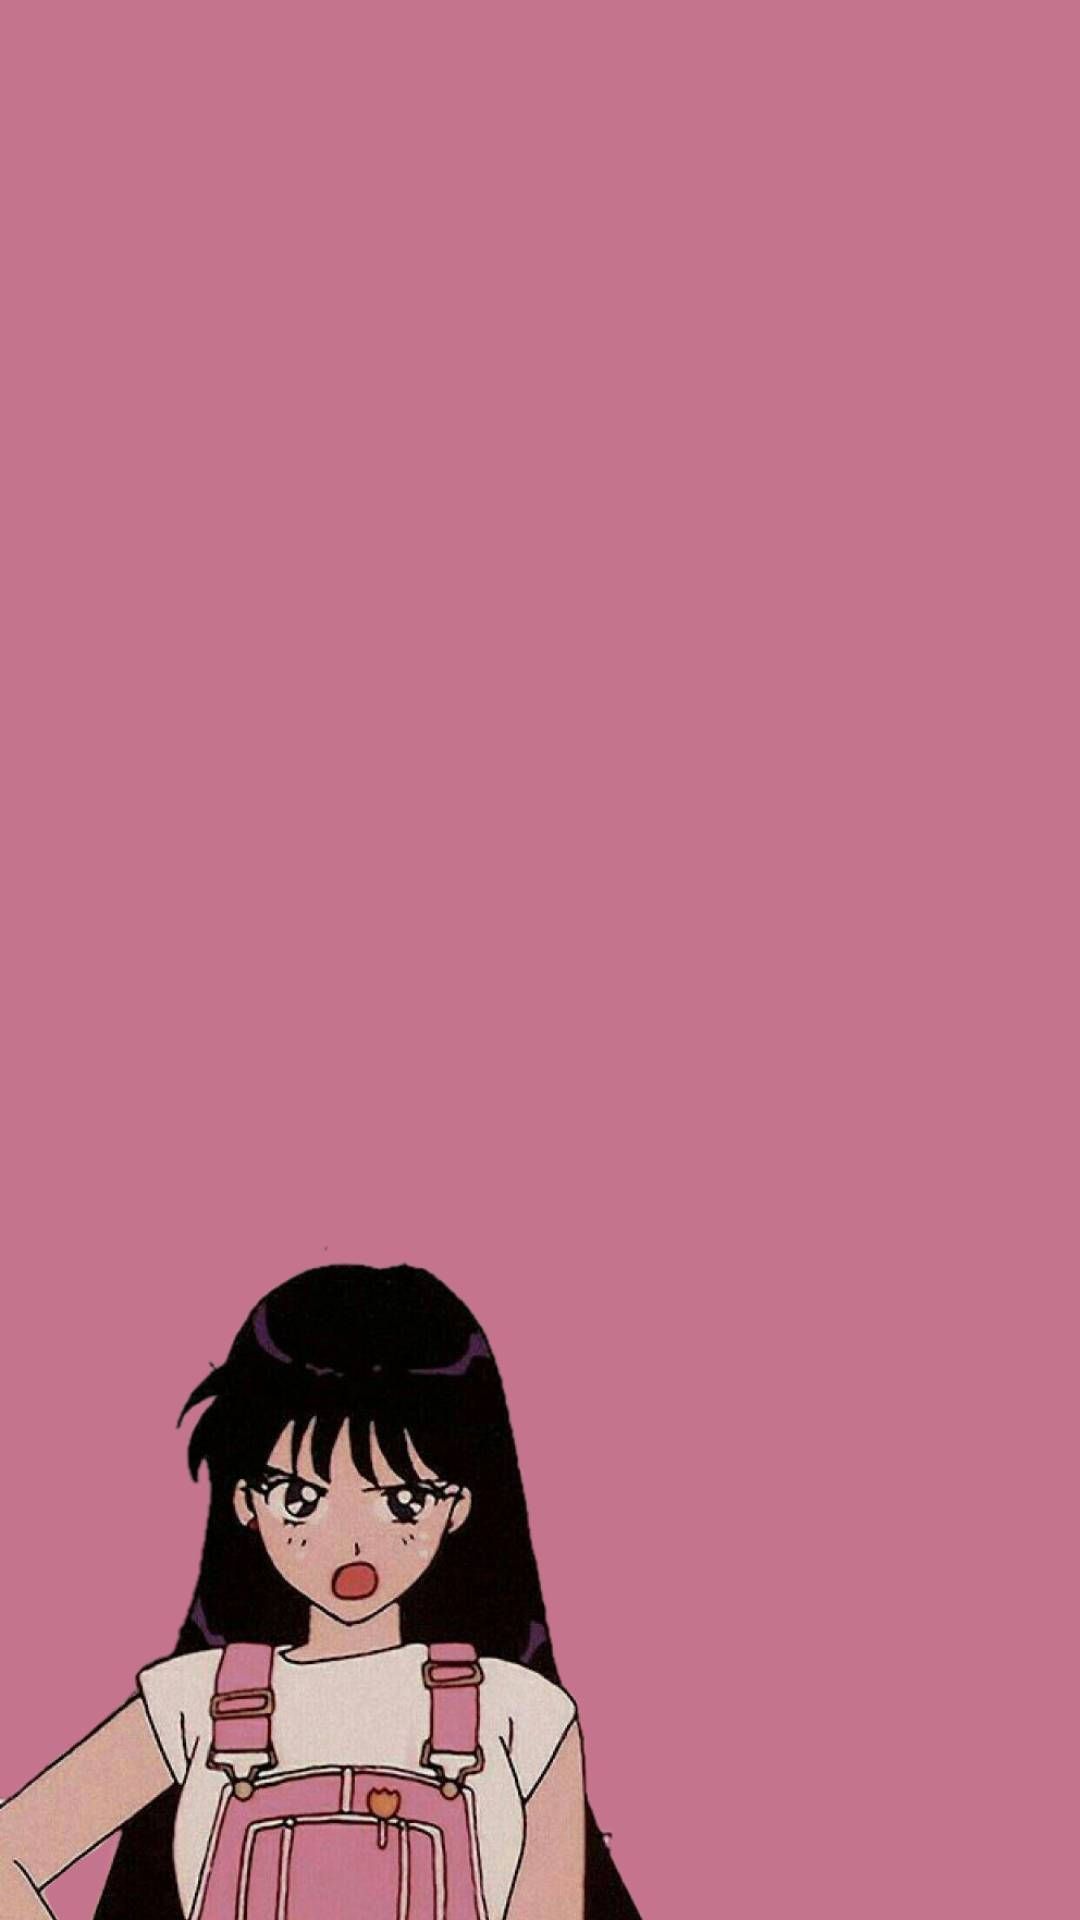 Anime girl in overalls standing against a pink wall - Sailor Mars